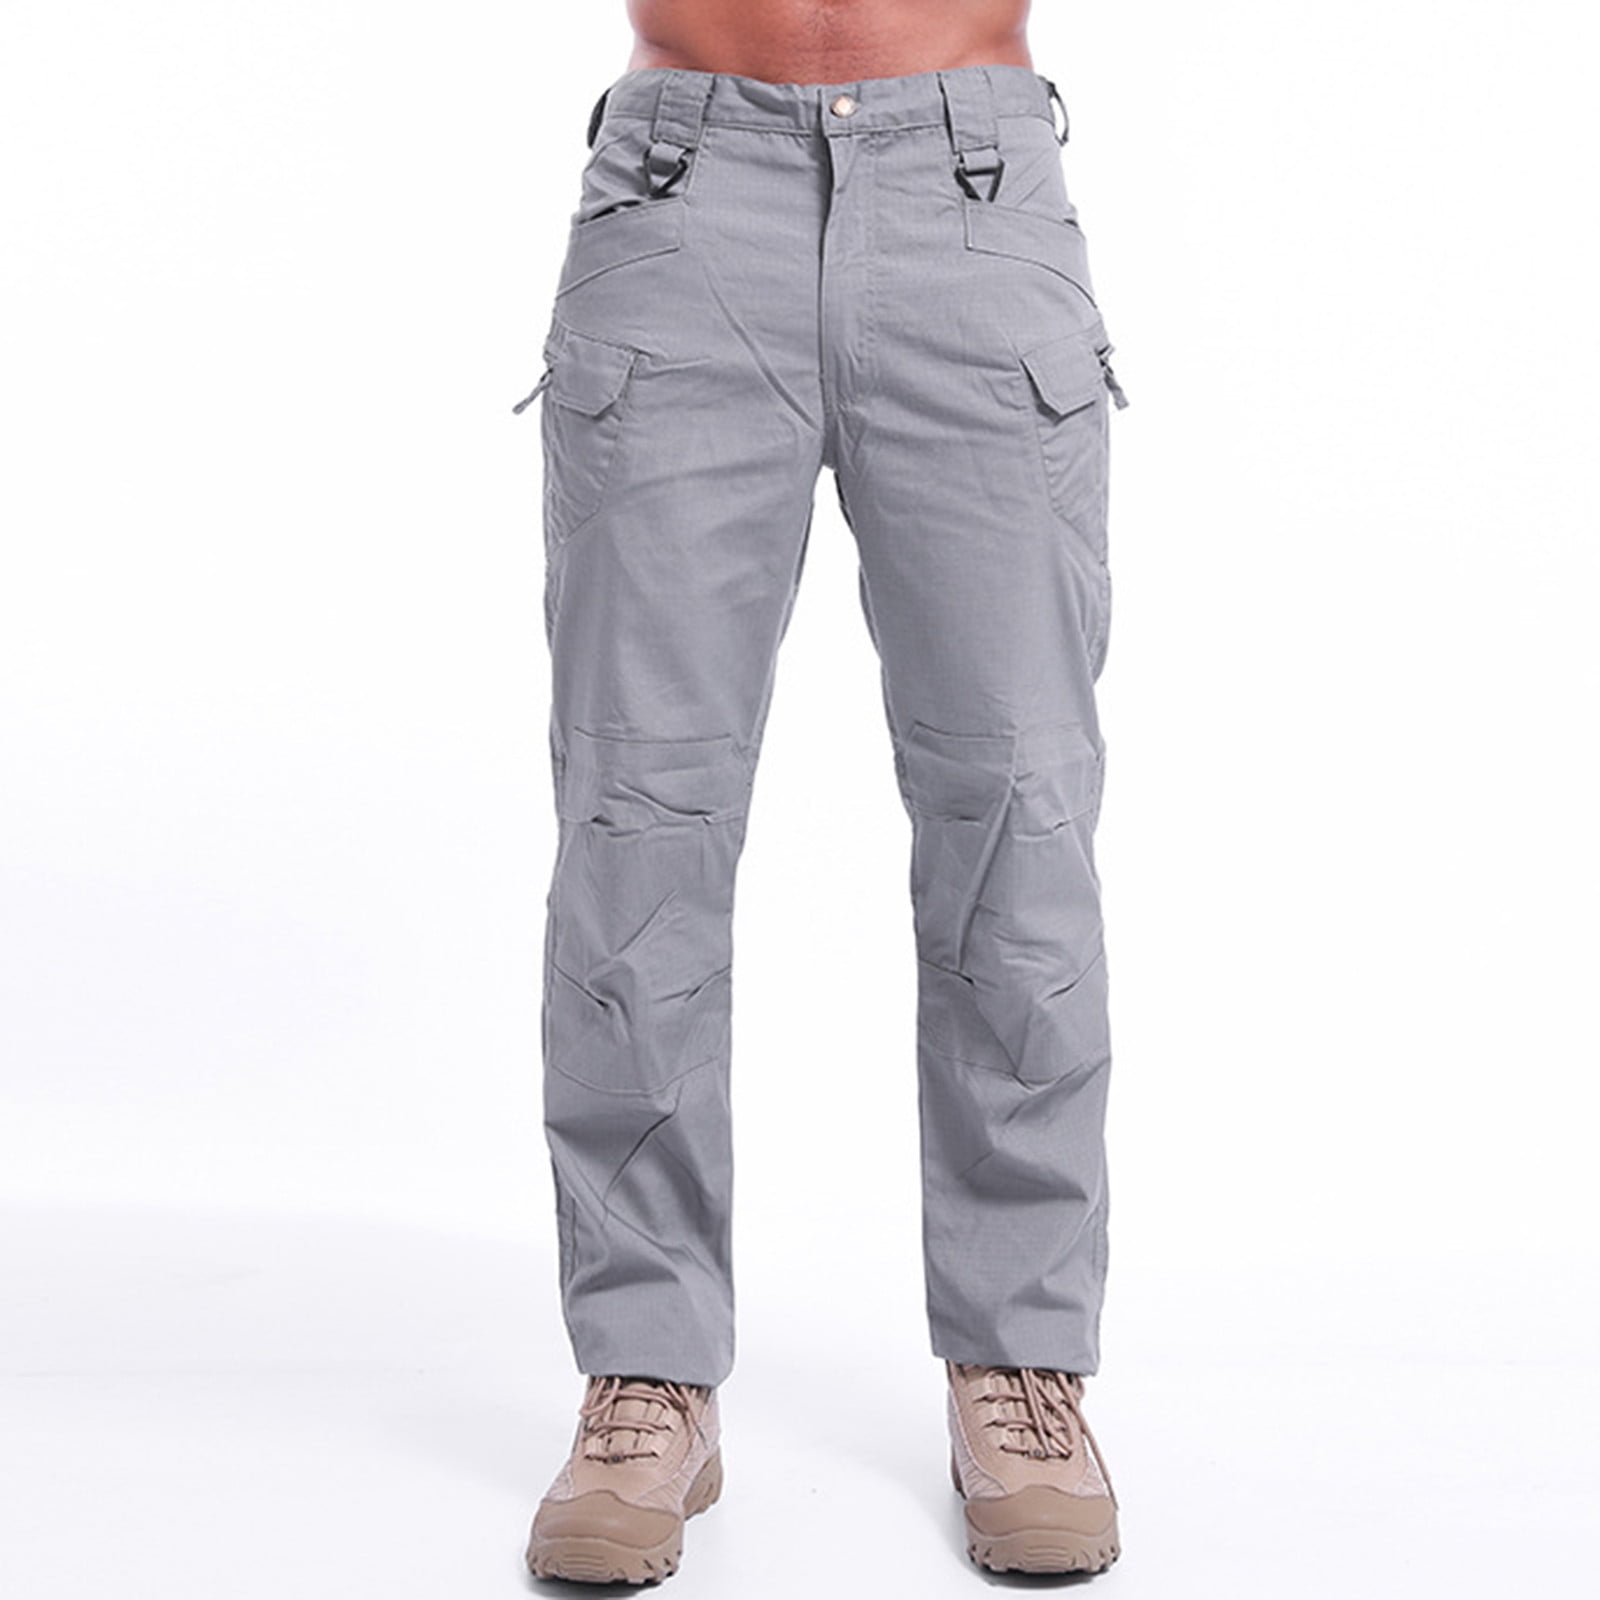 Cotton Straight Leg Sweatpants for Men High Waist Plus Size Track Pants  with Pockets Solid Color Classic-Fit Outdoor Hiking Trousers(Without Belt)